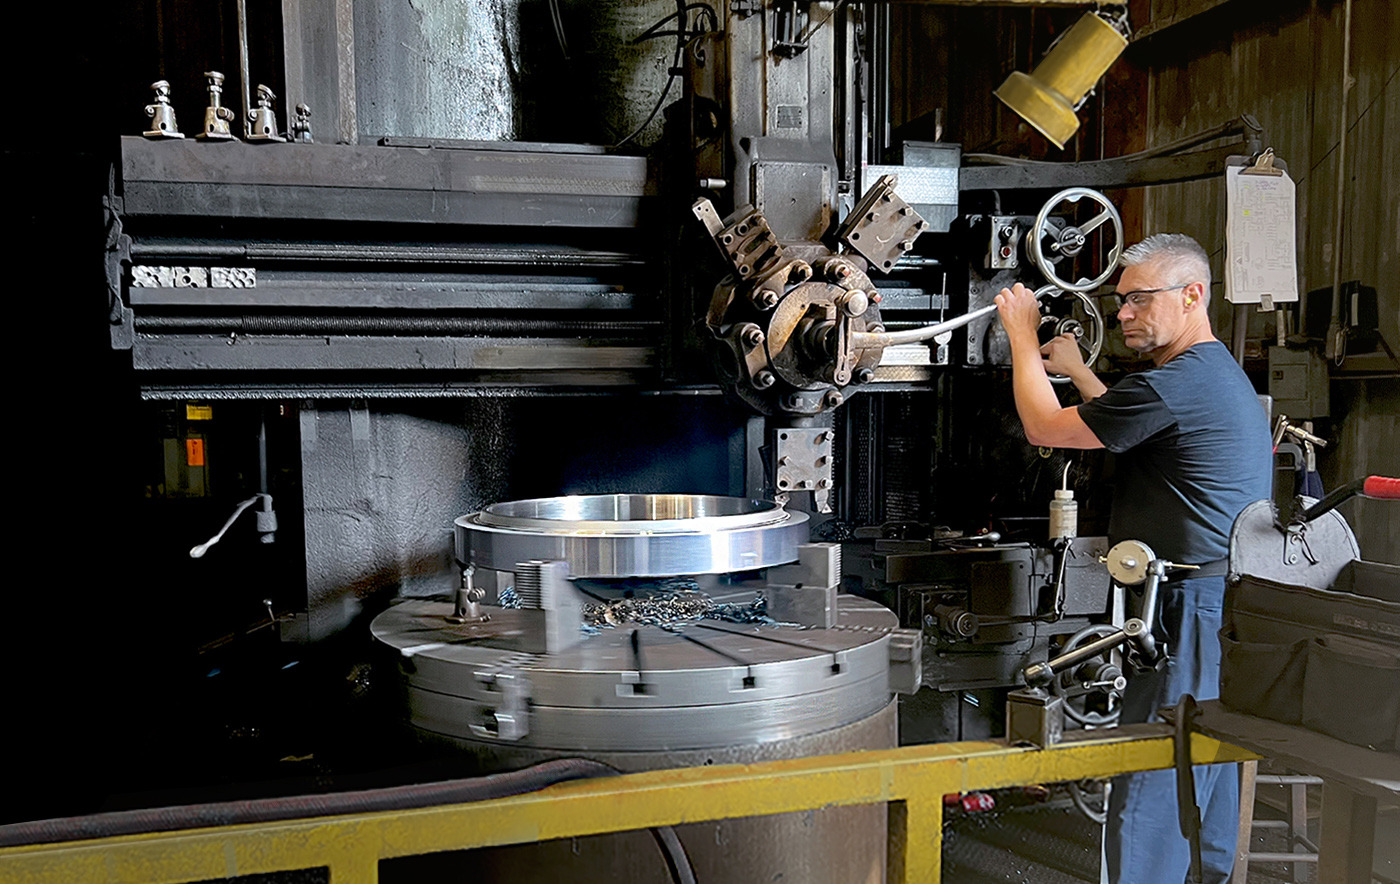 Contract Machining & Drilling Services for heat exchangers and pressure vessels - Lathe - 3